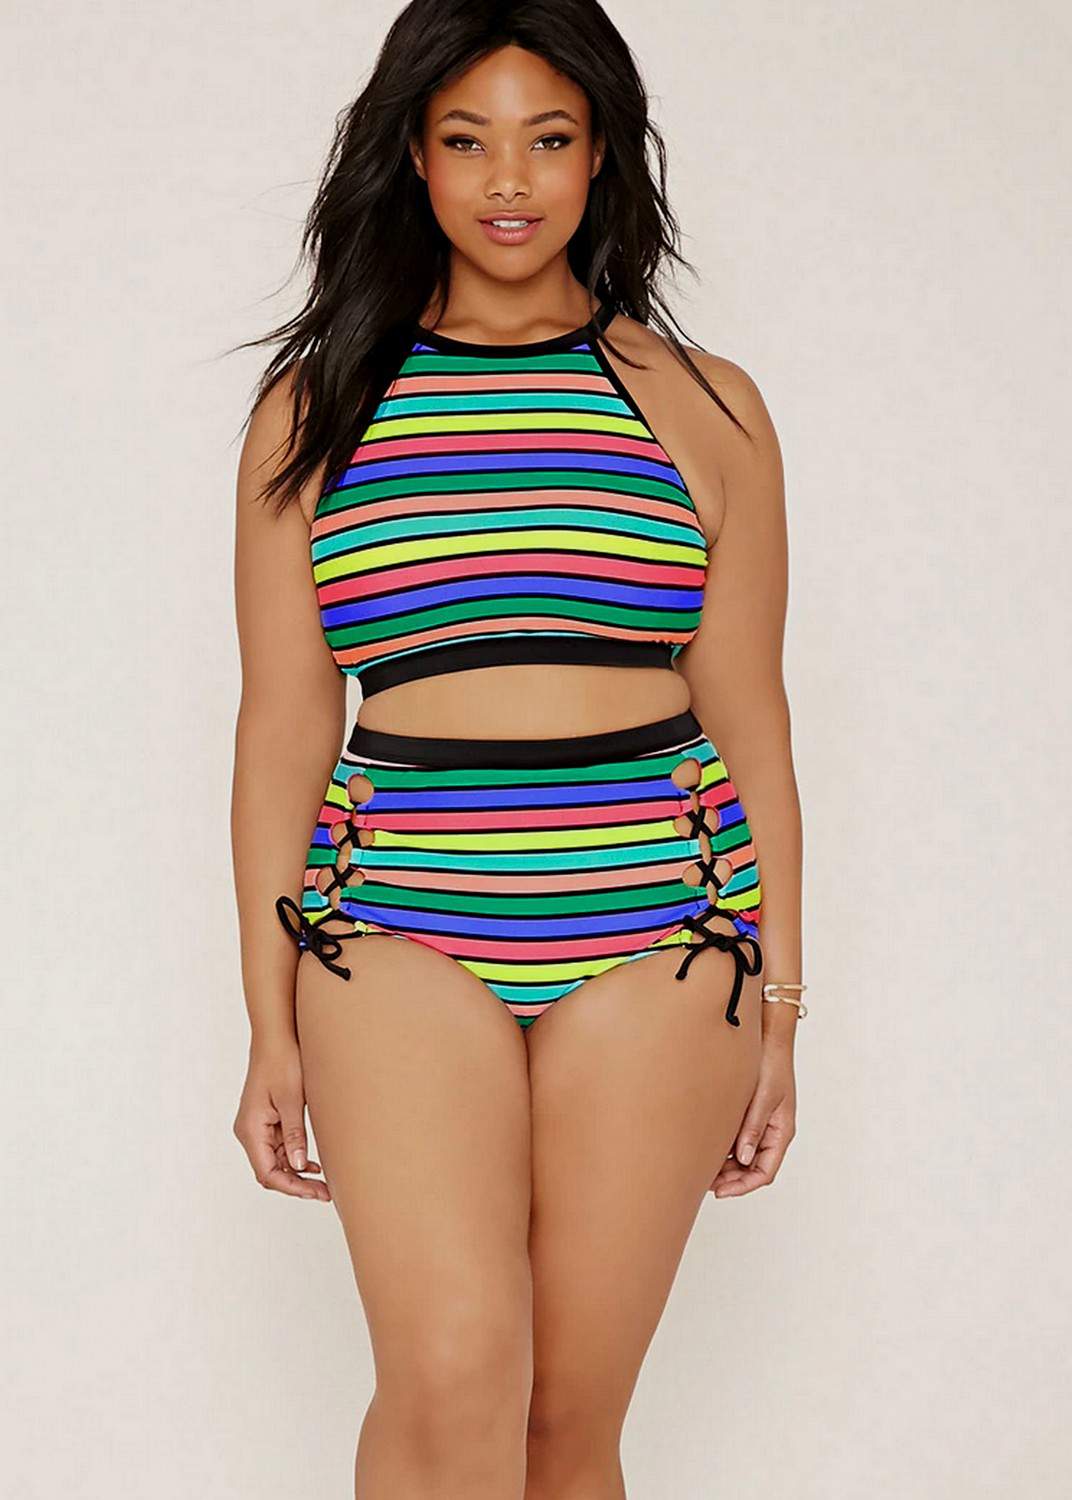 12 Must Have Plus Size Bikinis on The Curvy Fashionista 